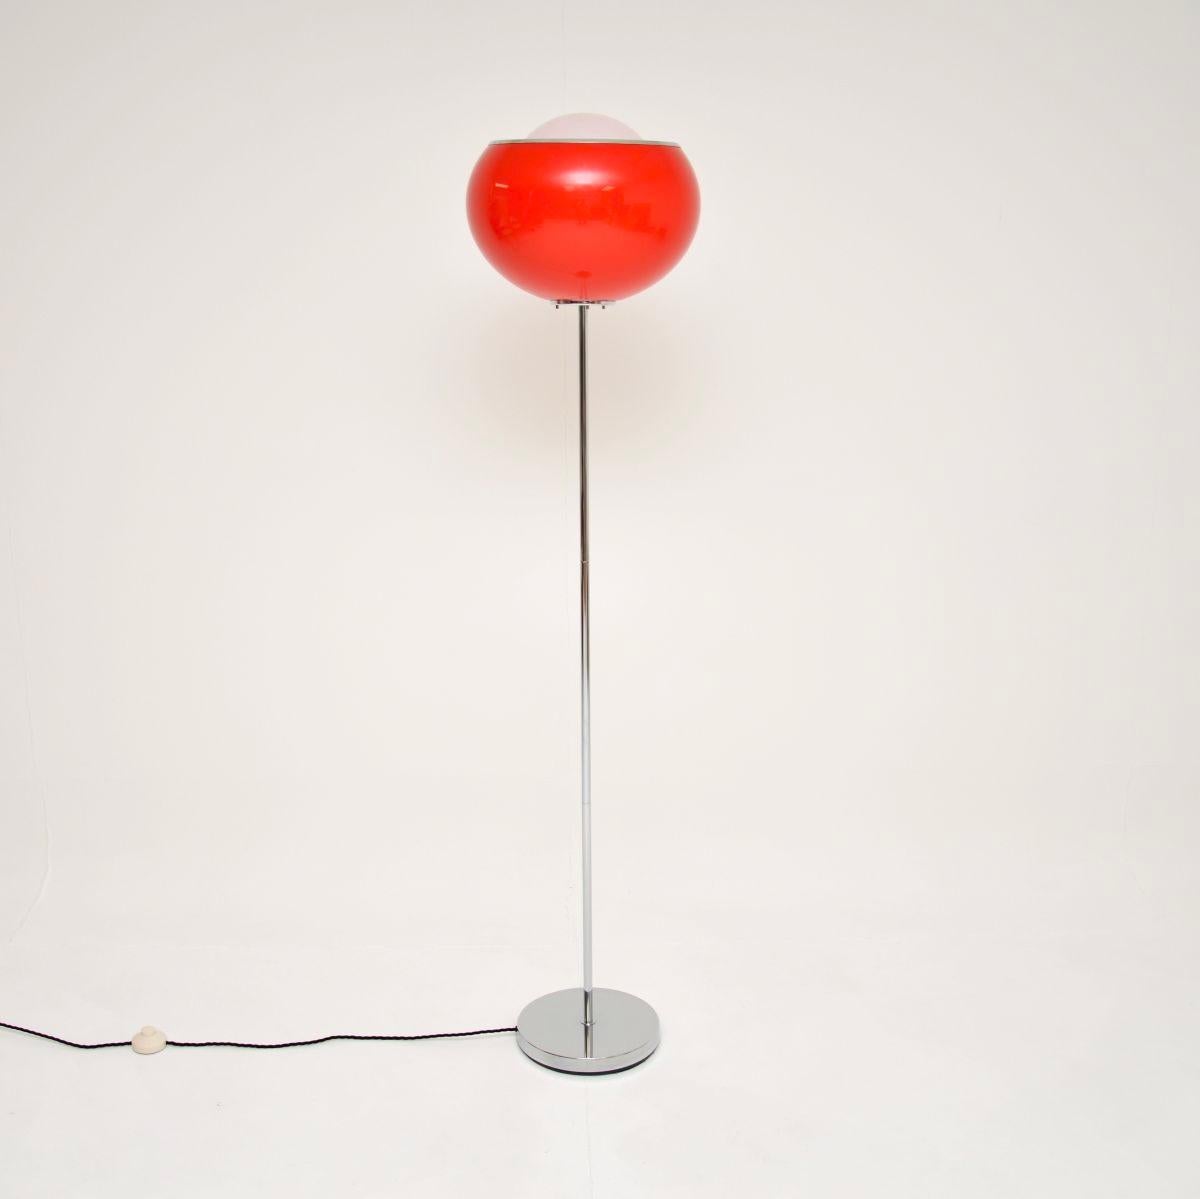 A stylish and very rare vintage Italian floor lamp by Harvey Guzzini. This was made in Italy and dates from around the 1970’s.

This version with the red shade is hardly ever seen, it is very well made and is of super quality.

The condition is